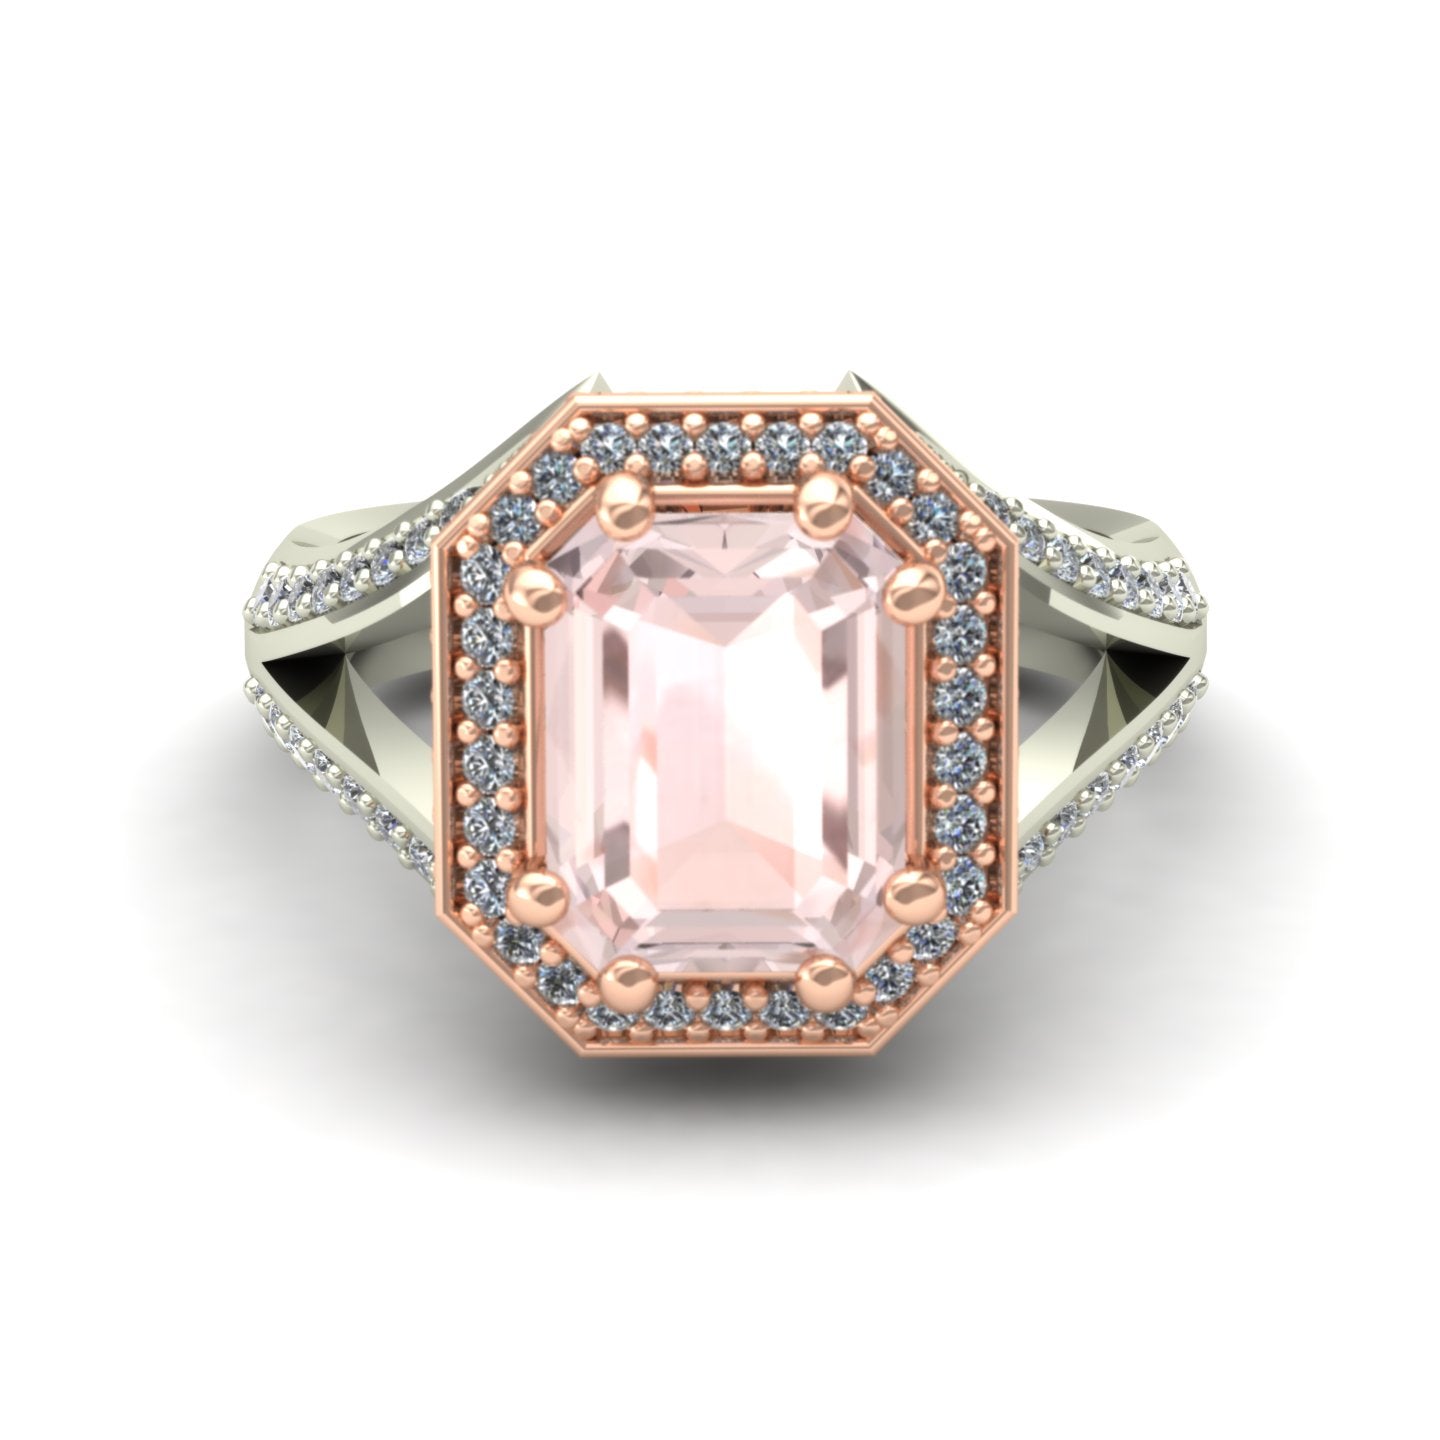 emerald cut morganite and diamond two tone split shank ring in 14k rose and white gold - Charles Babb Designs - top view